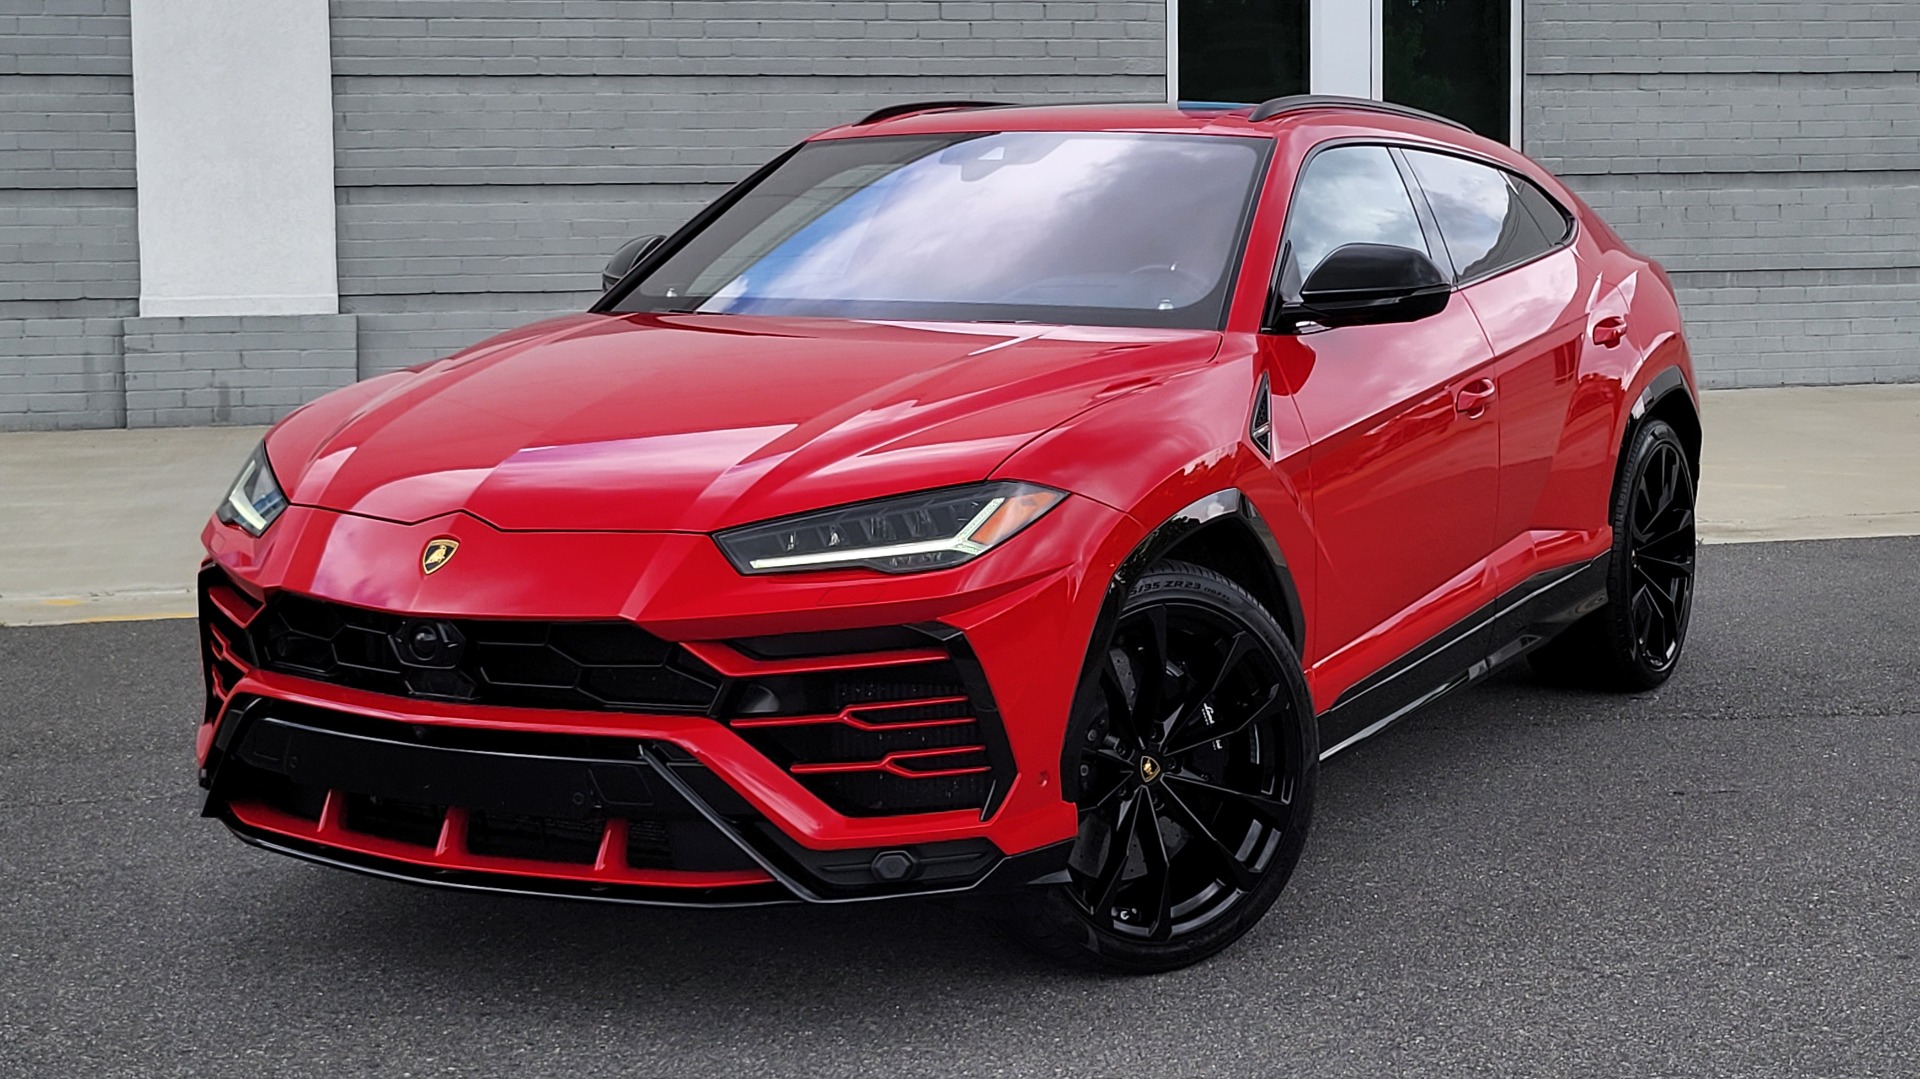 Used 2019 Lamborghini URUS 4.0L V8 / AUTO / AWD / NAV / SUNROOF / LEATHER / REARVIEW for sale Sold at Formula Imports in Charlotte NC 28227 1